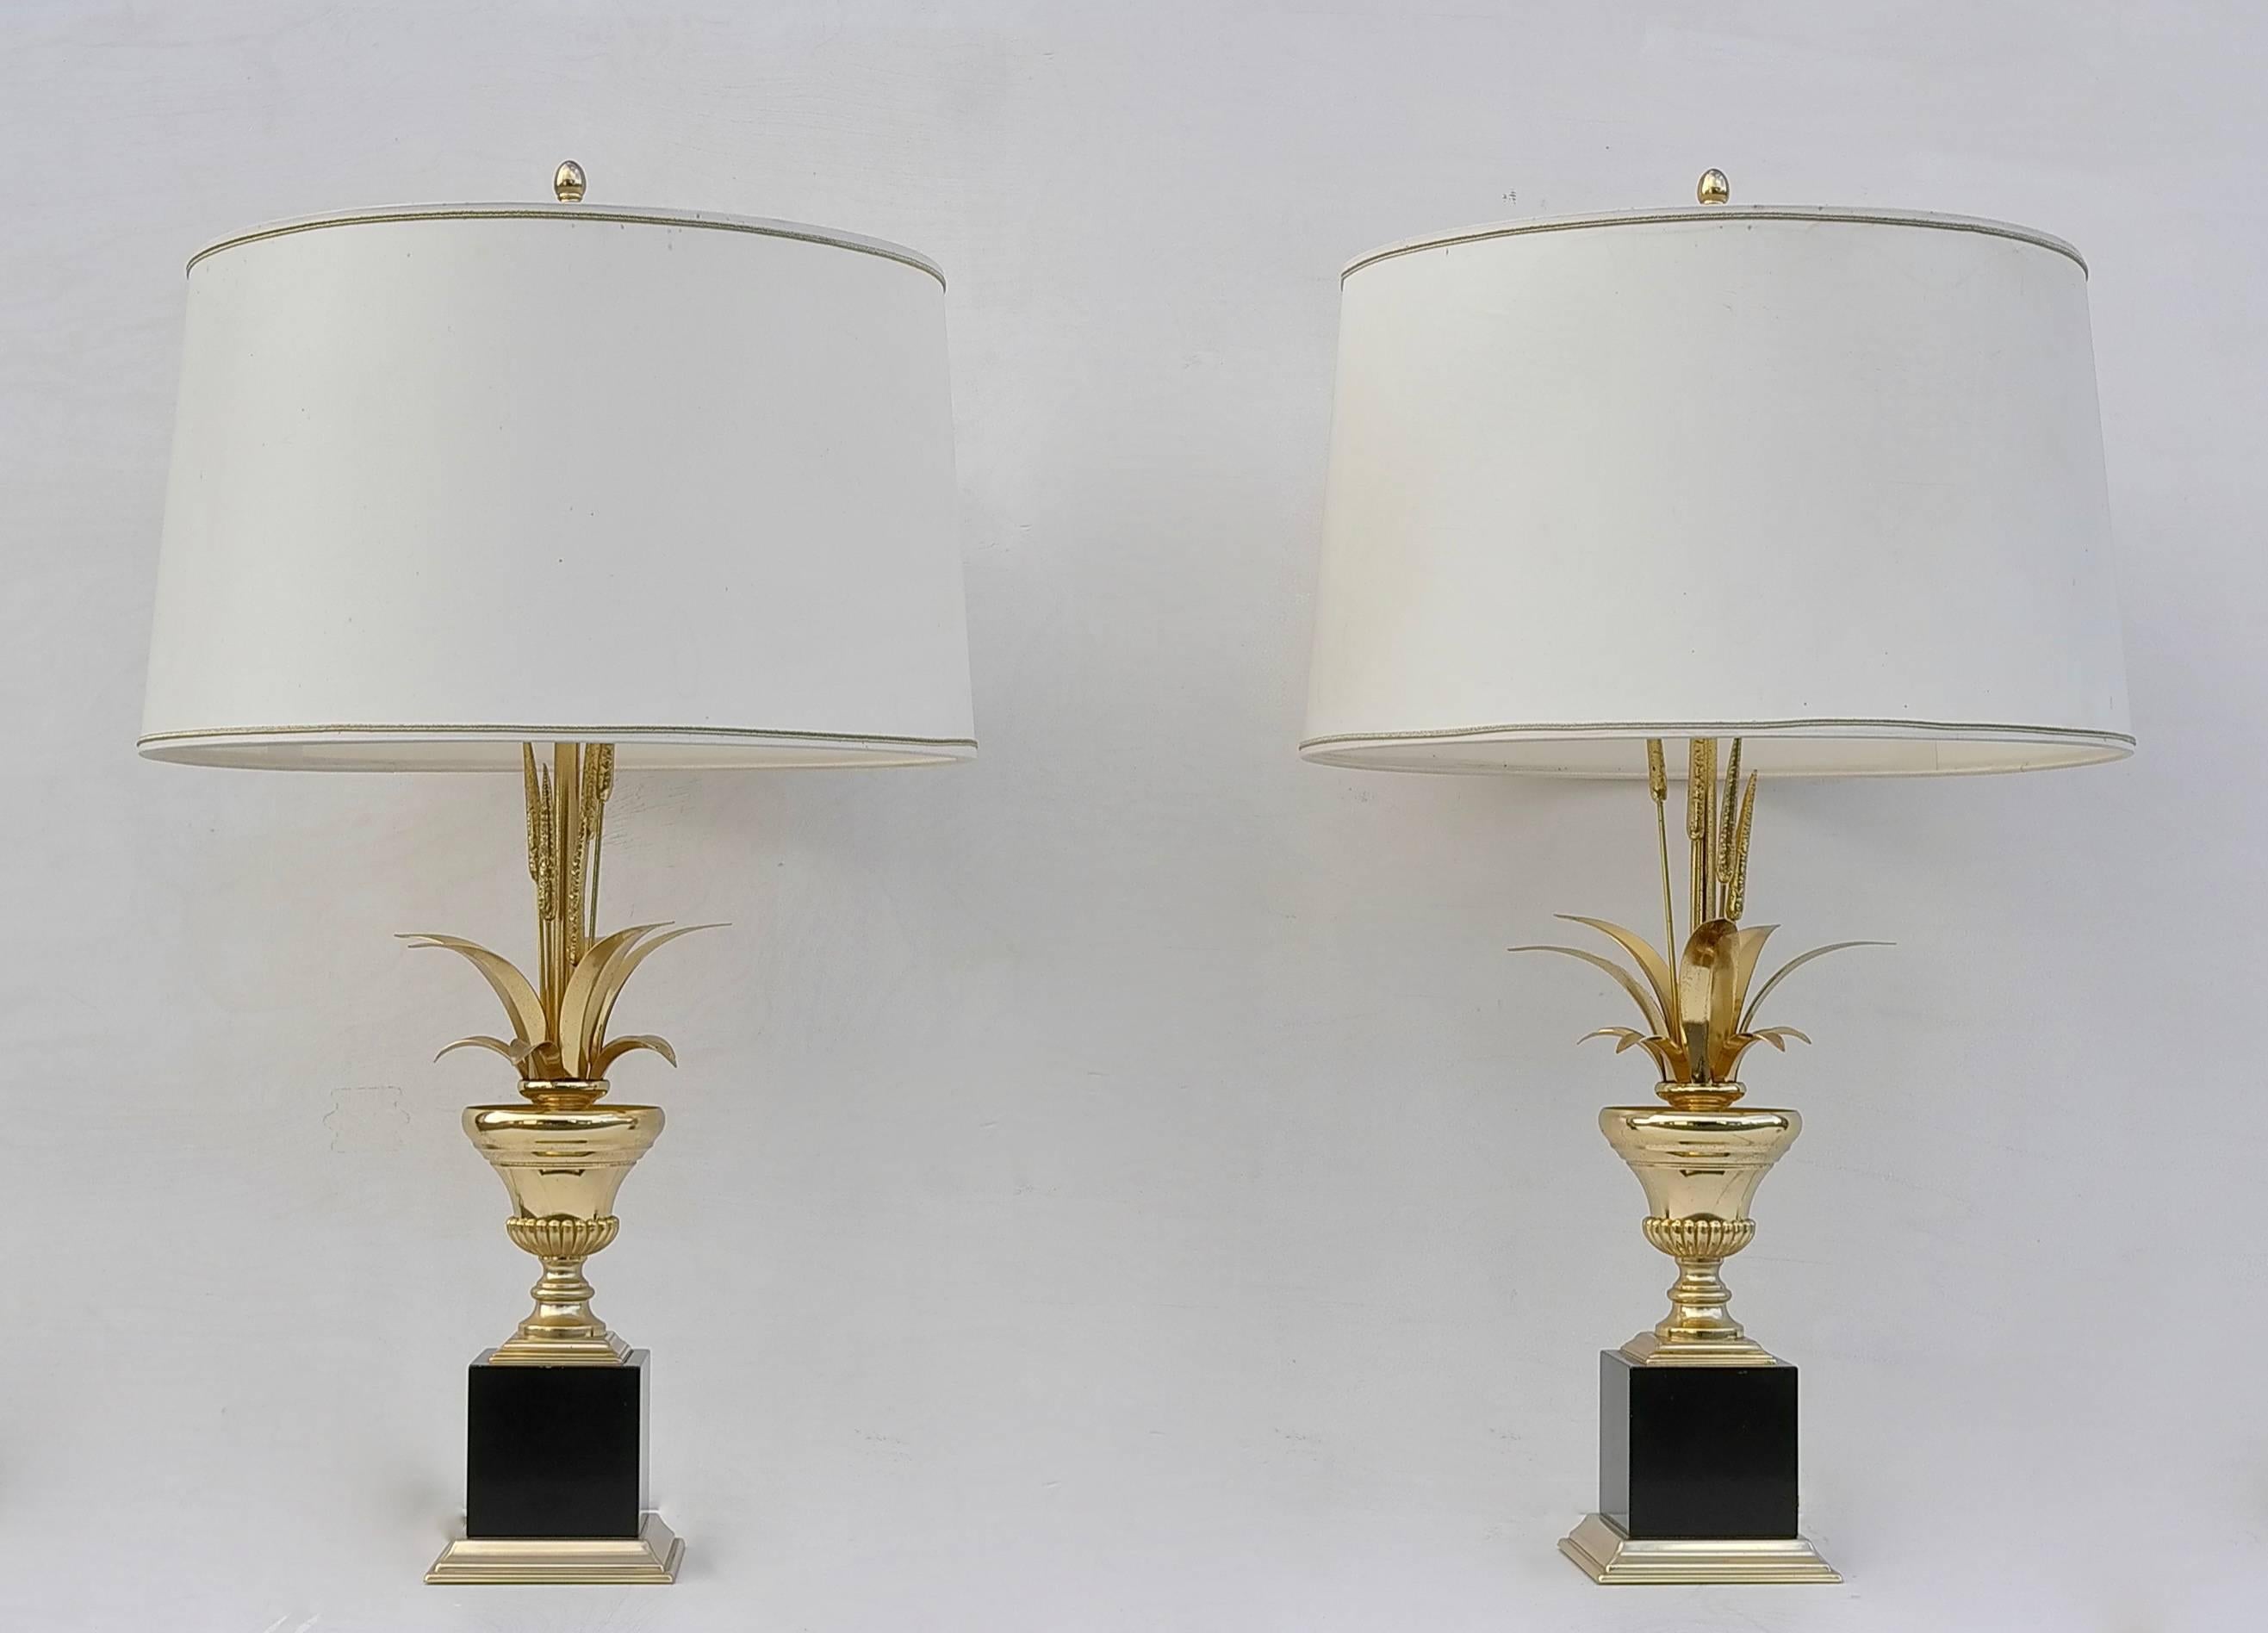 Pair of Maison Charles table lamps, France, 1960s.